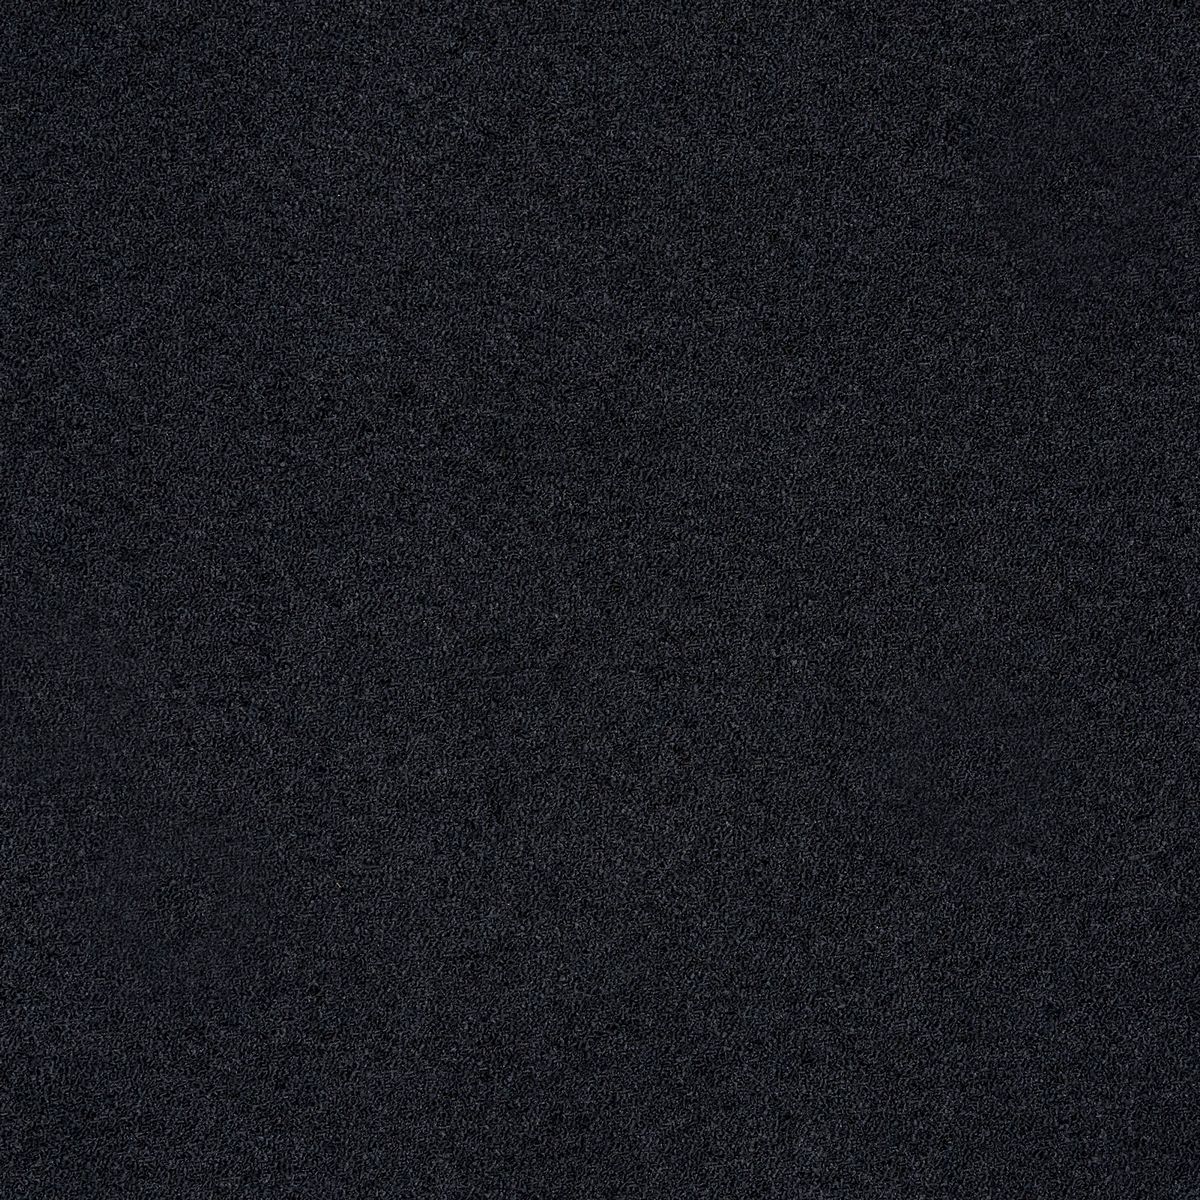 Lux Boucle Noir Fabric by Porter & Stone